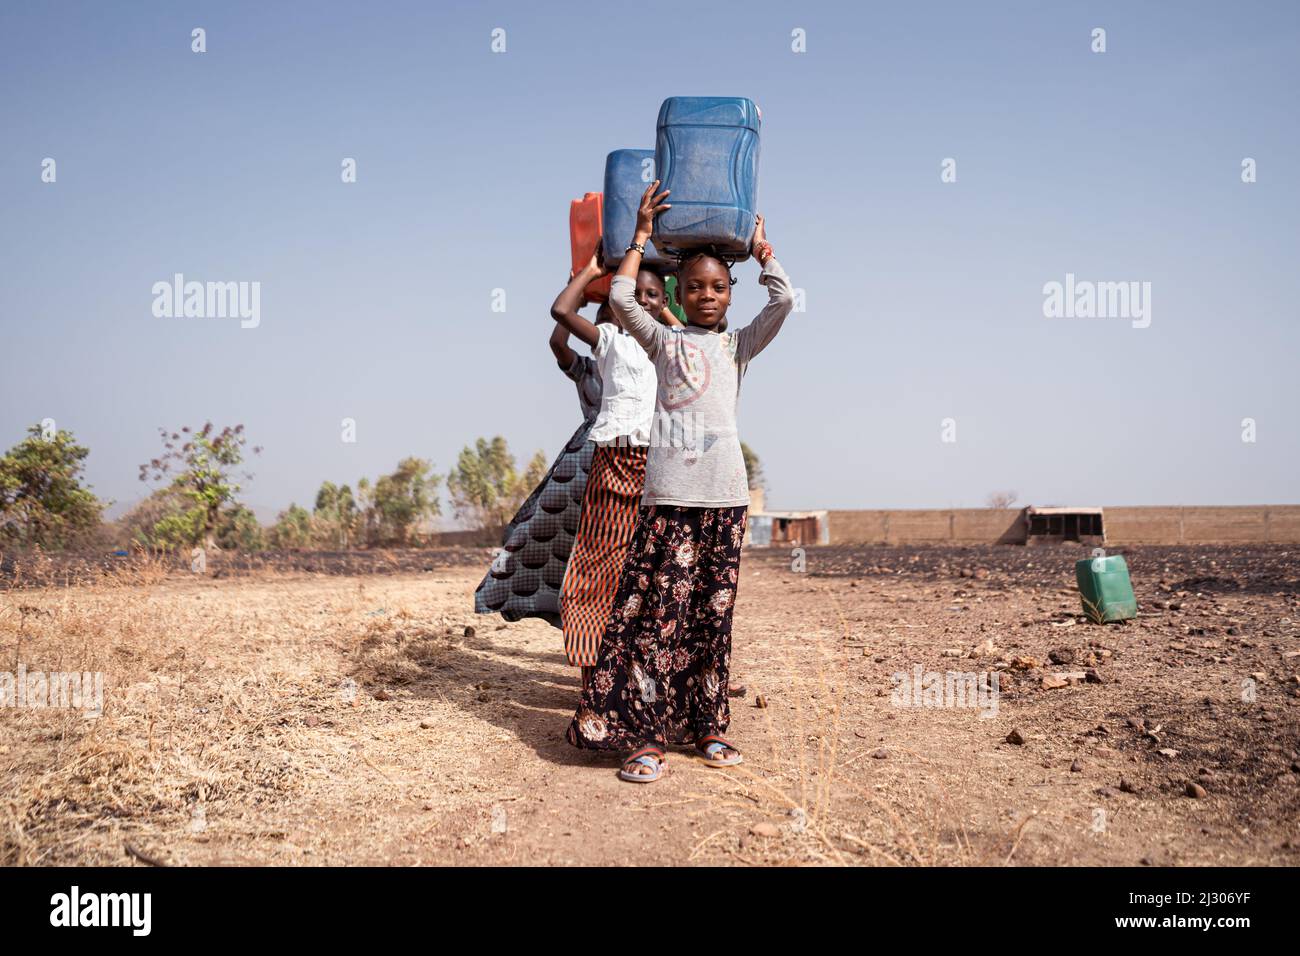 Small procession of girls in the rural African countryside engaged in the transport of drinking water from the distant borehole to their village Stock Photo